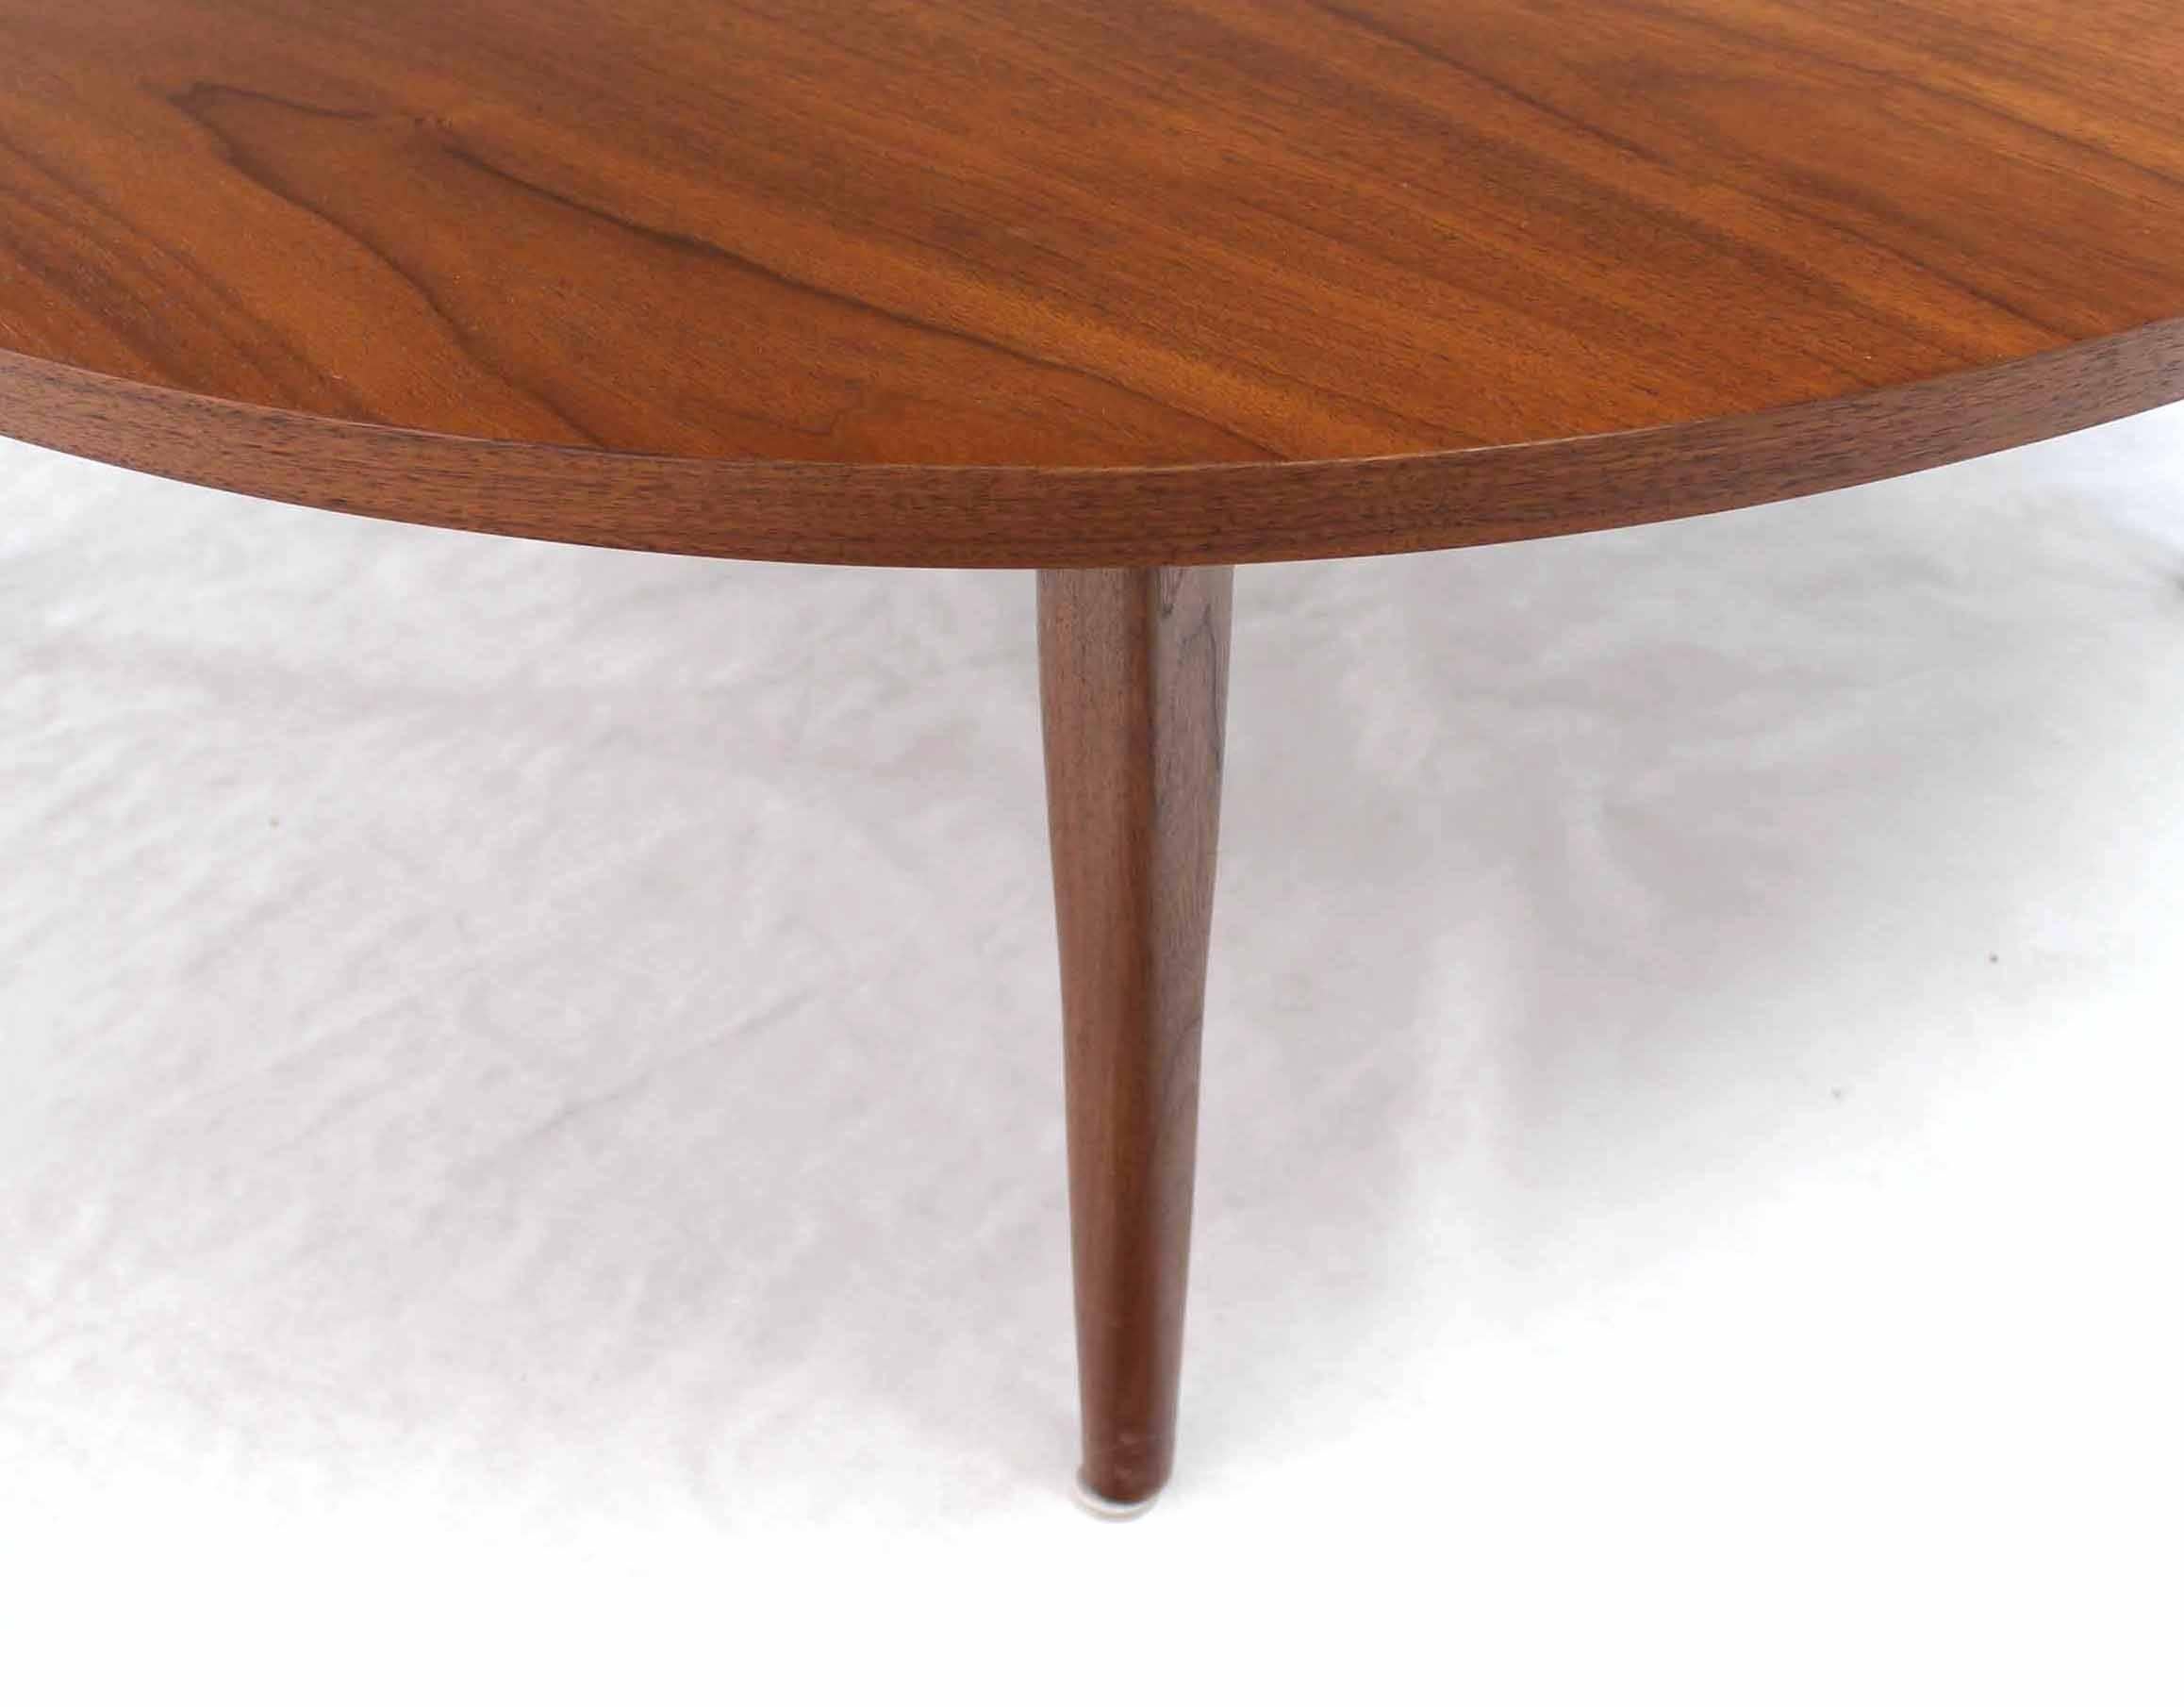 20th Century Walnut Coffee Table with Accents Pattern in the Center